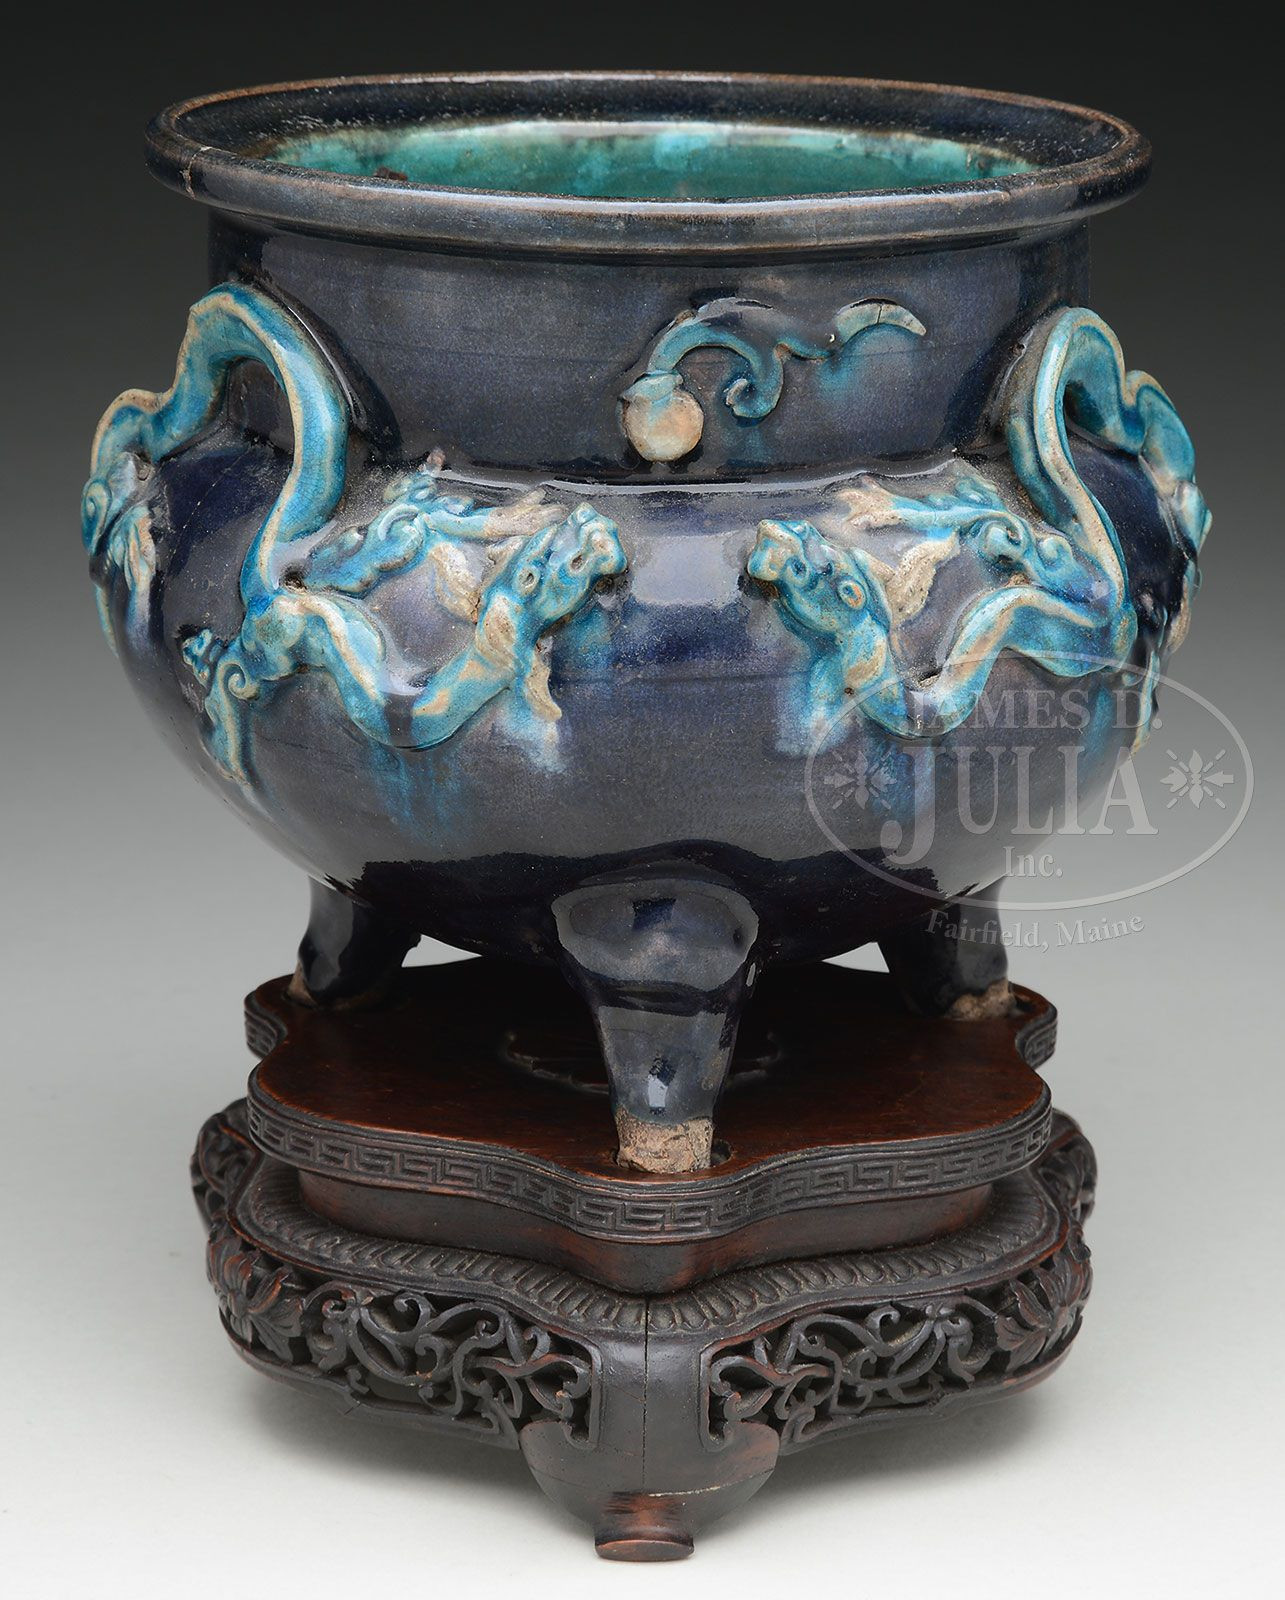 26 Awesome Ming Dynasty Vase for Sale 2024 free download ming dynasty vase for sale of fahua glazed footed censer china late ming dynasty the censer within china late ming dynasty the censer raised on three